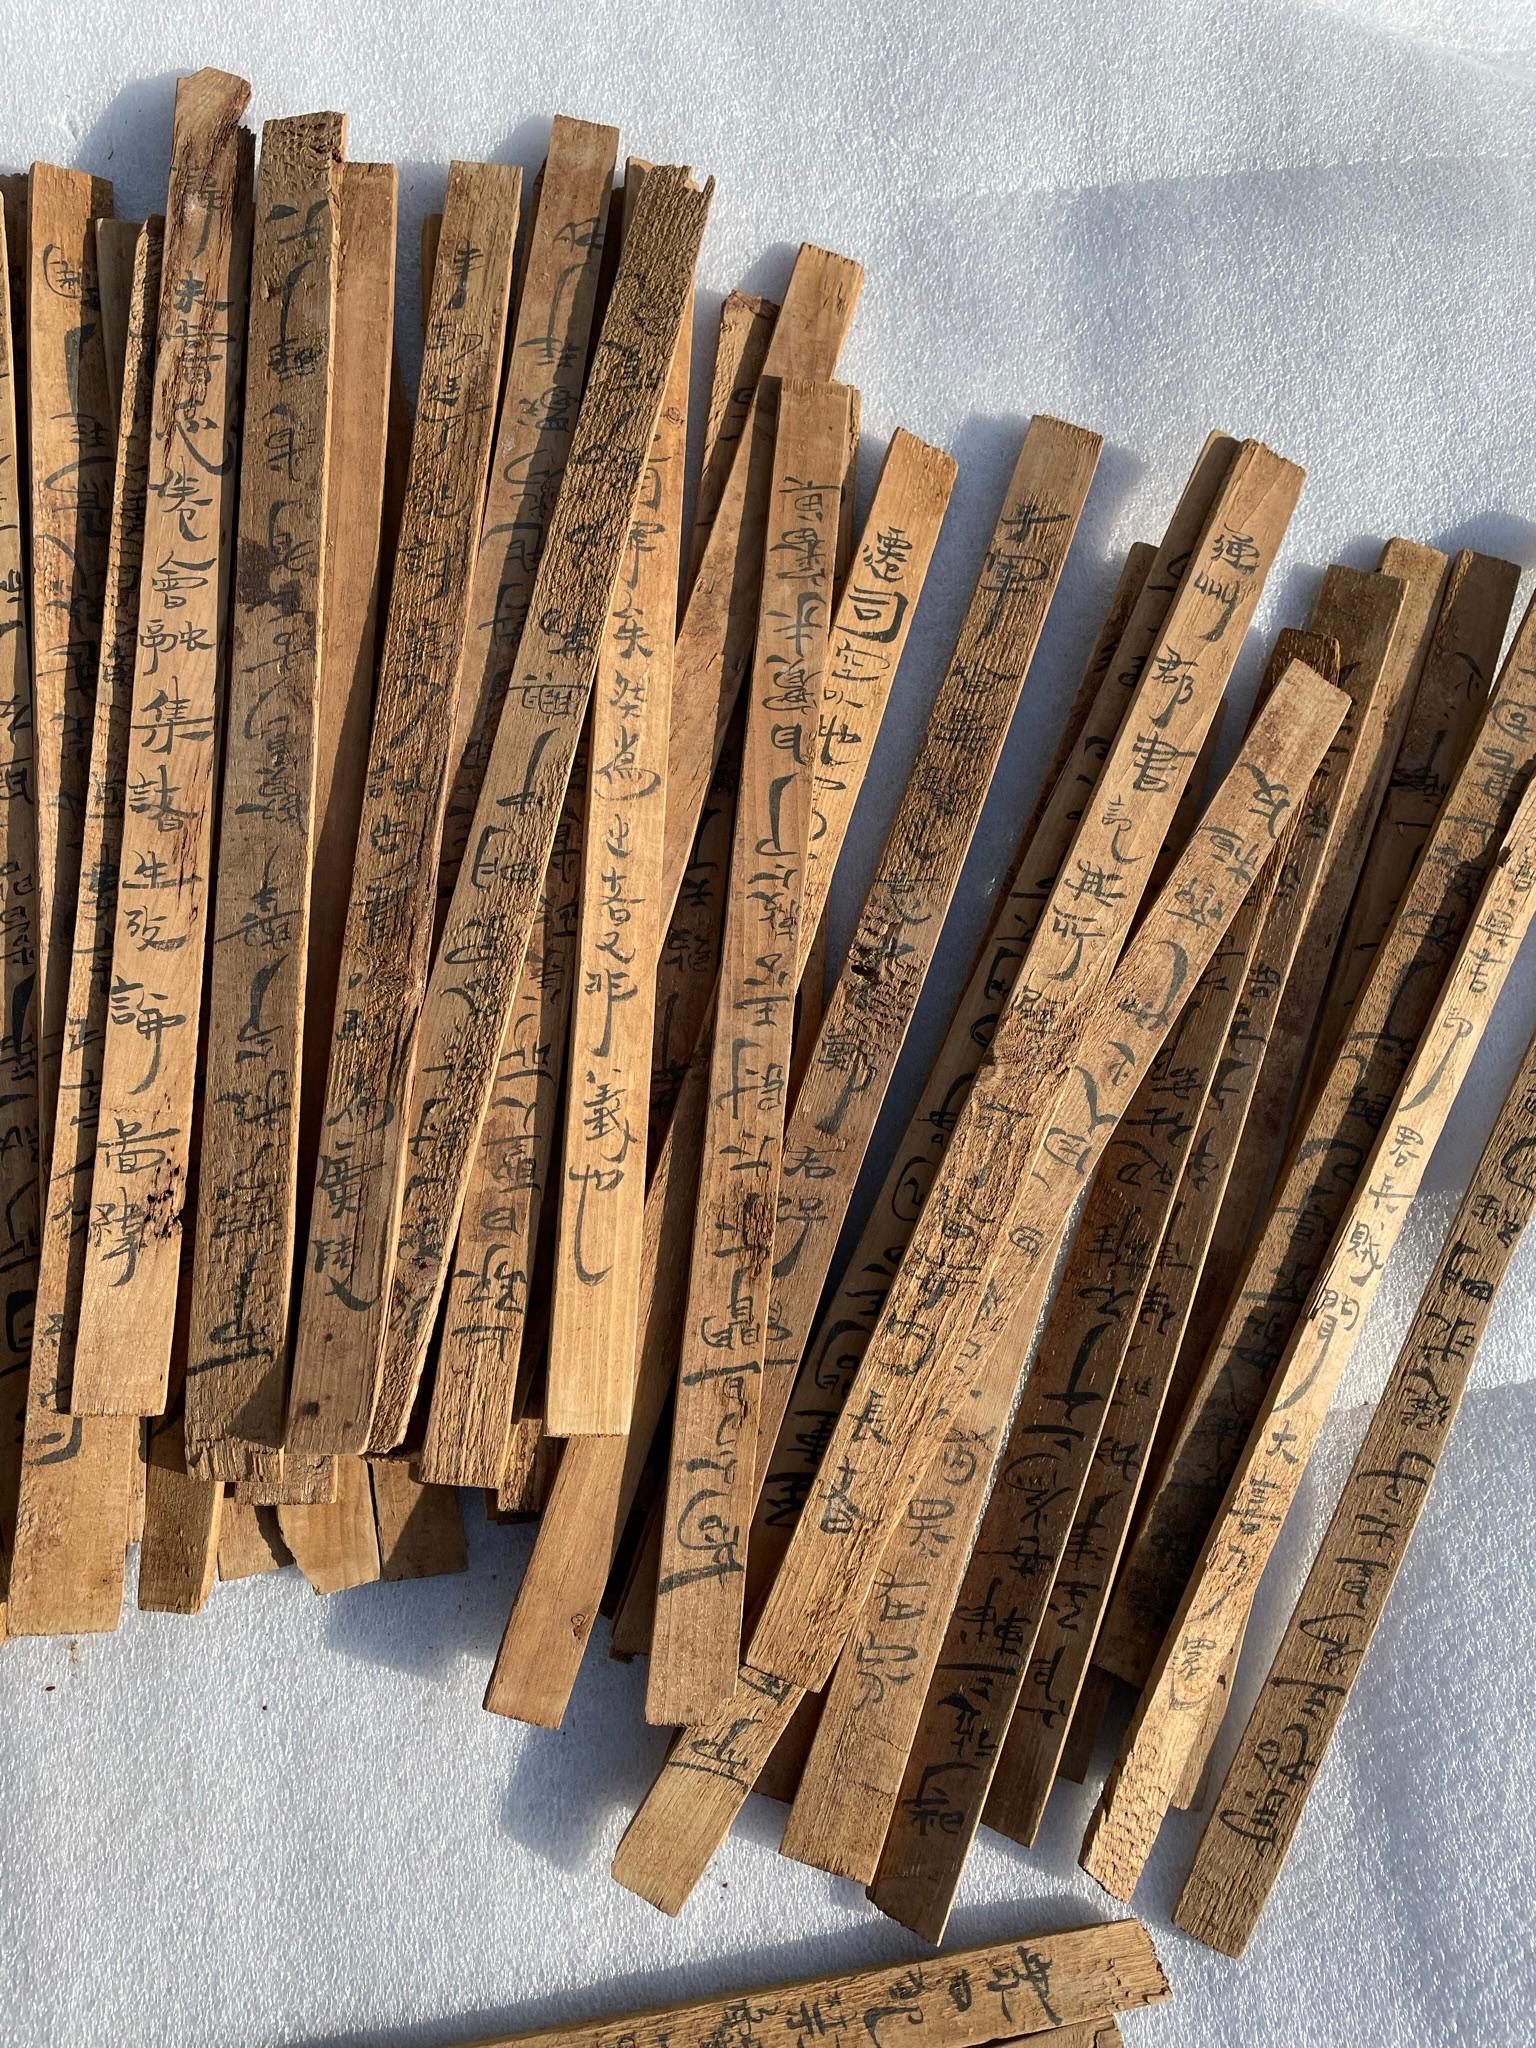 Chinese Old Bamboo Slips with Calligraphy Jiandu, 59 Piece Collection In Good Condition For Sale In South Burlington, VT